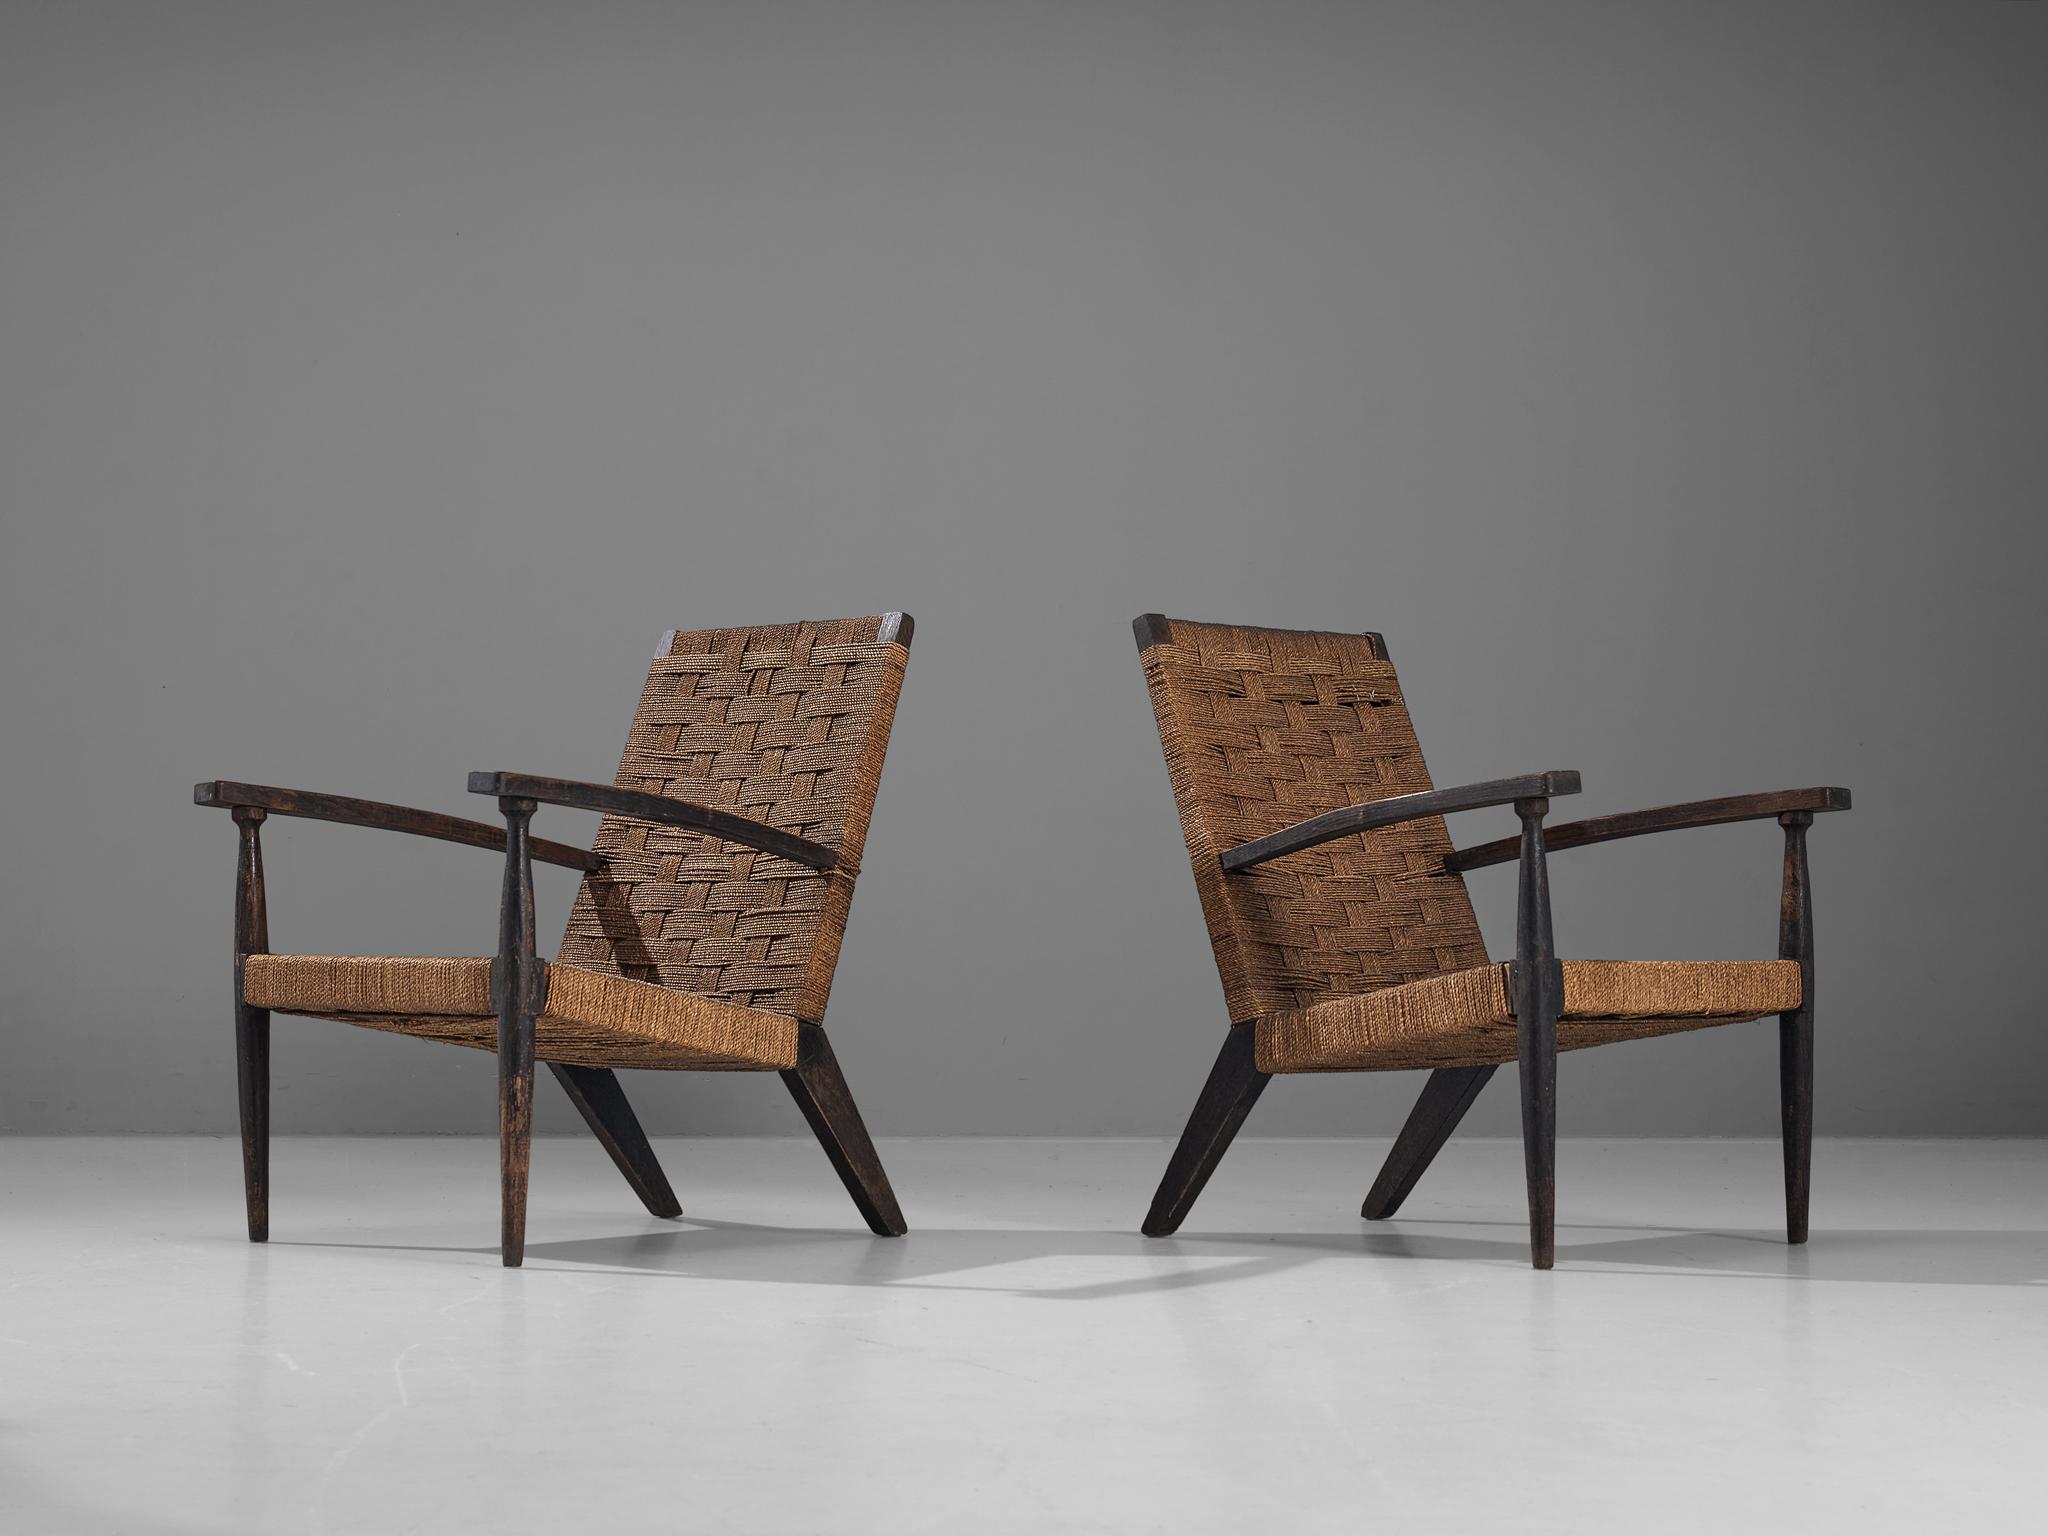 Lounge chairs, stained wood, rope, Italy, 1960s. 

Pair of Italian chairs executed in rope and stained wood. Its design resembles the furniture of Italian designer Giuseppe Pagano Pogatschnig. Rustic yet elegant due the sleek tapered legs that